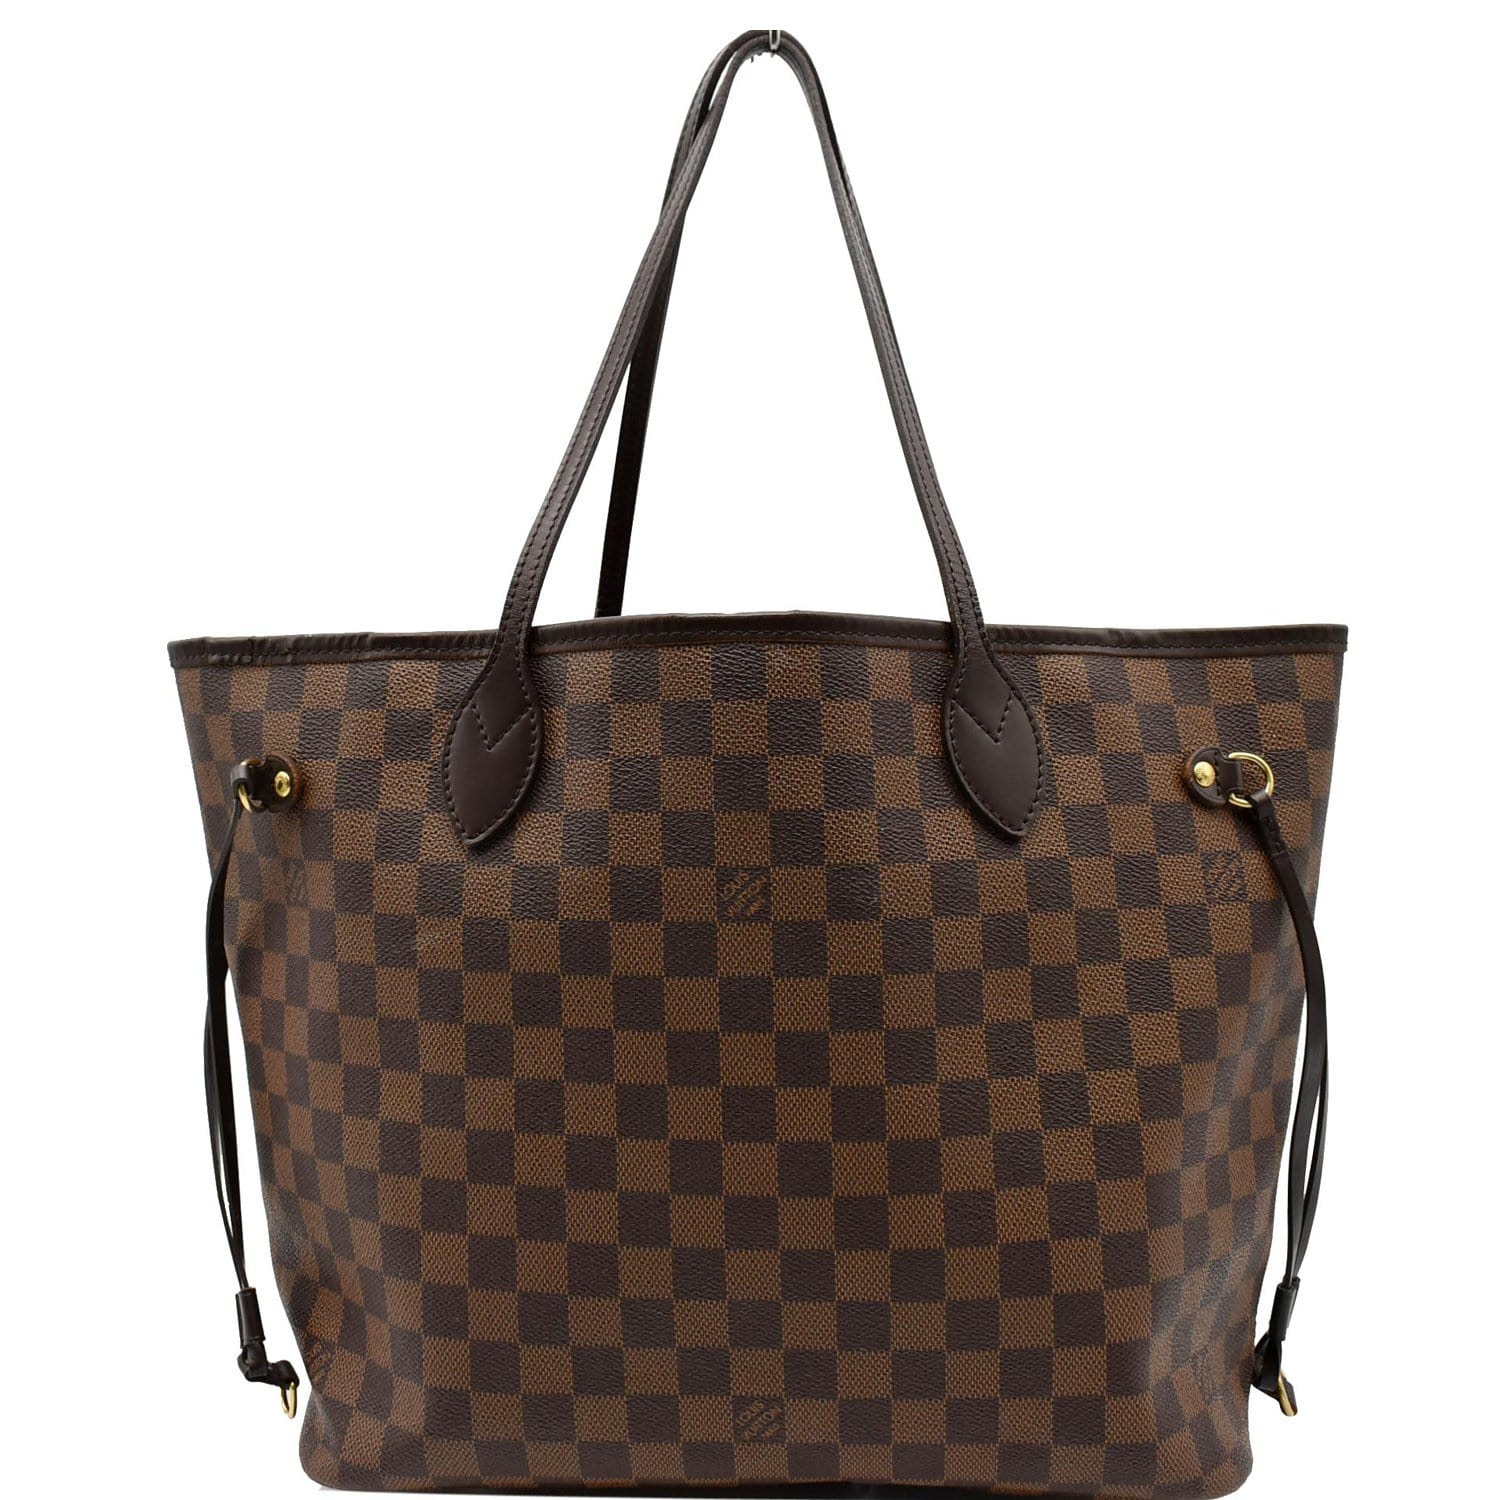 Louis Vuitton 2008 Pre-owned Damier Ebene Two-Way Zip Briefcase - Brown